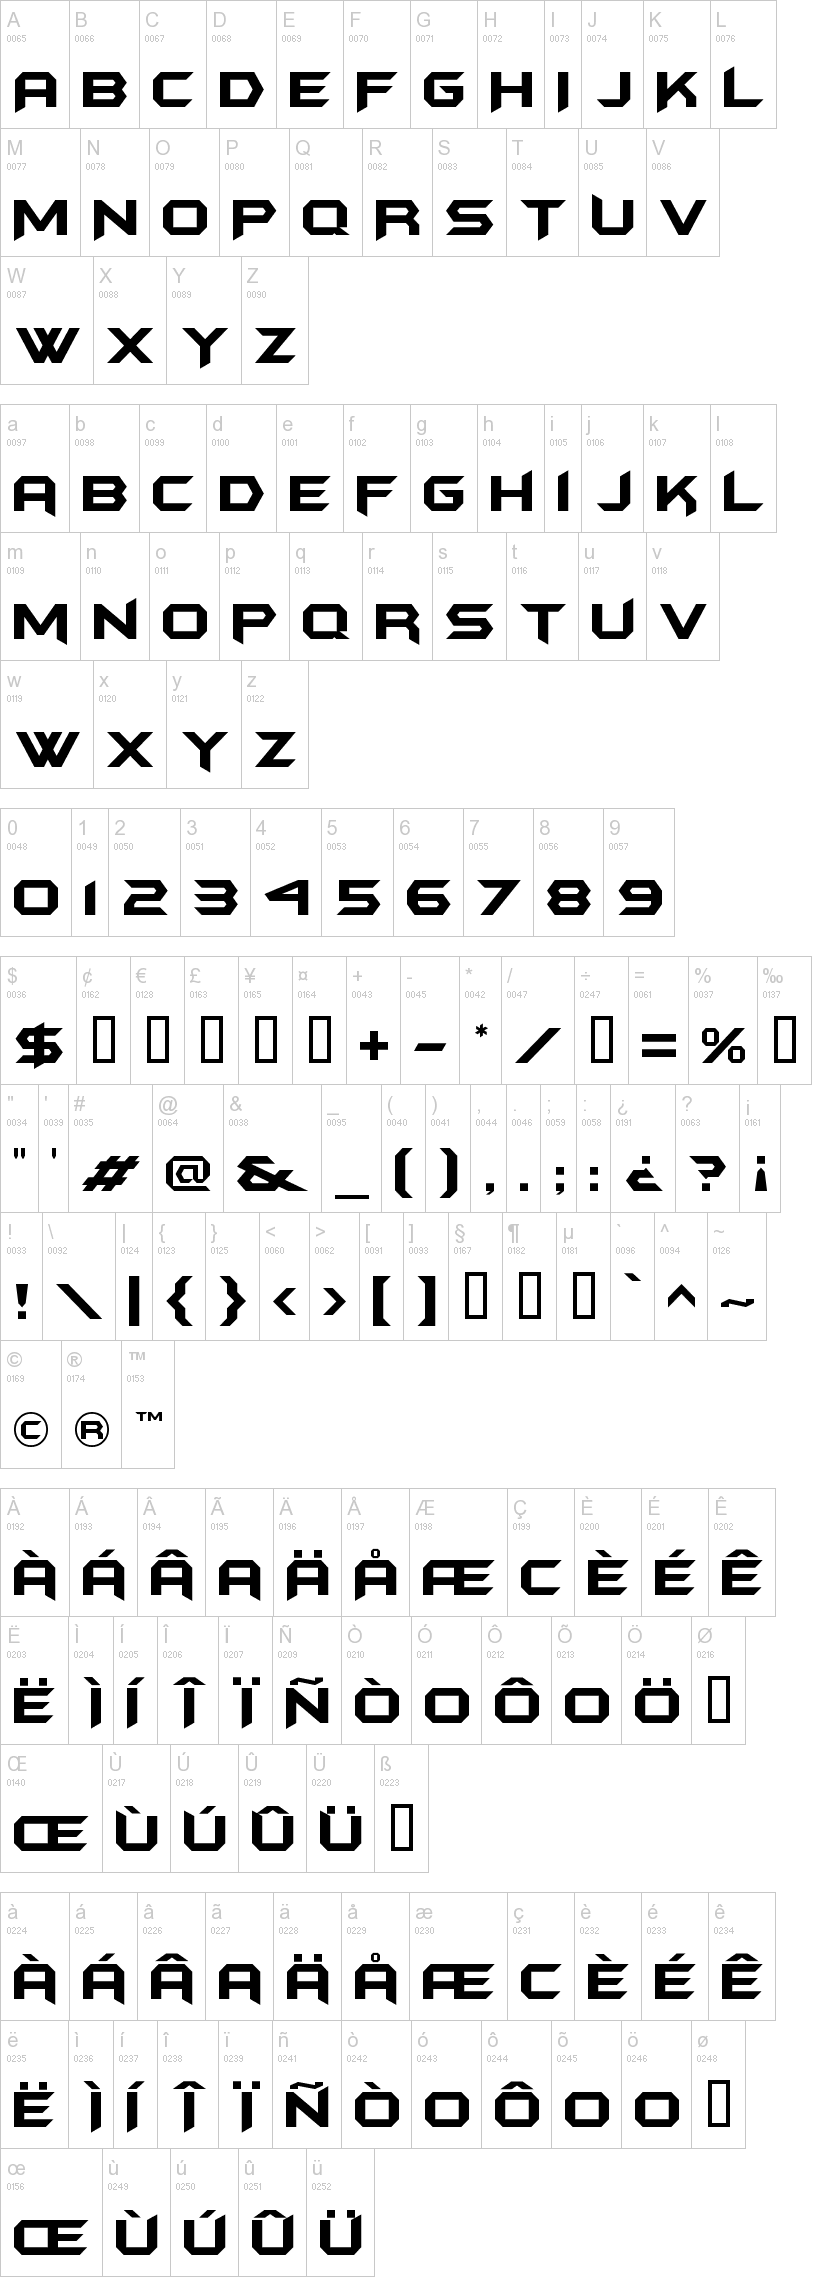 True Type Fonts with the letter M.